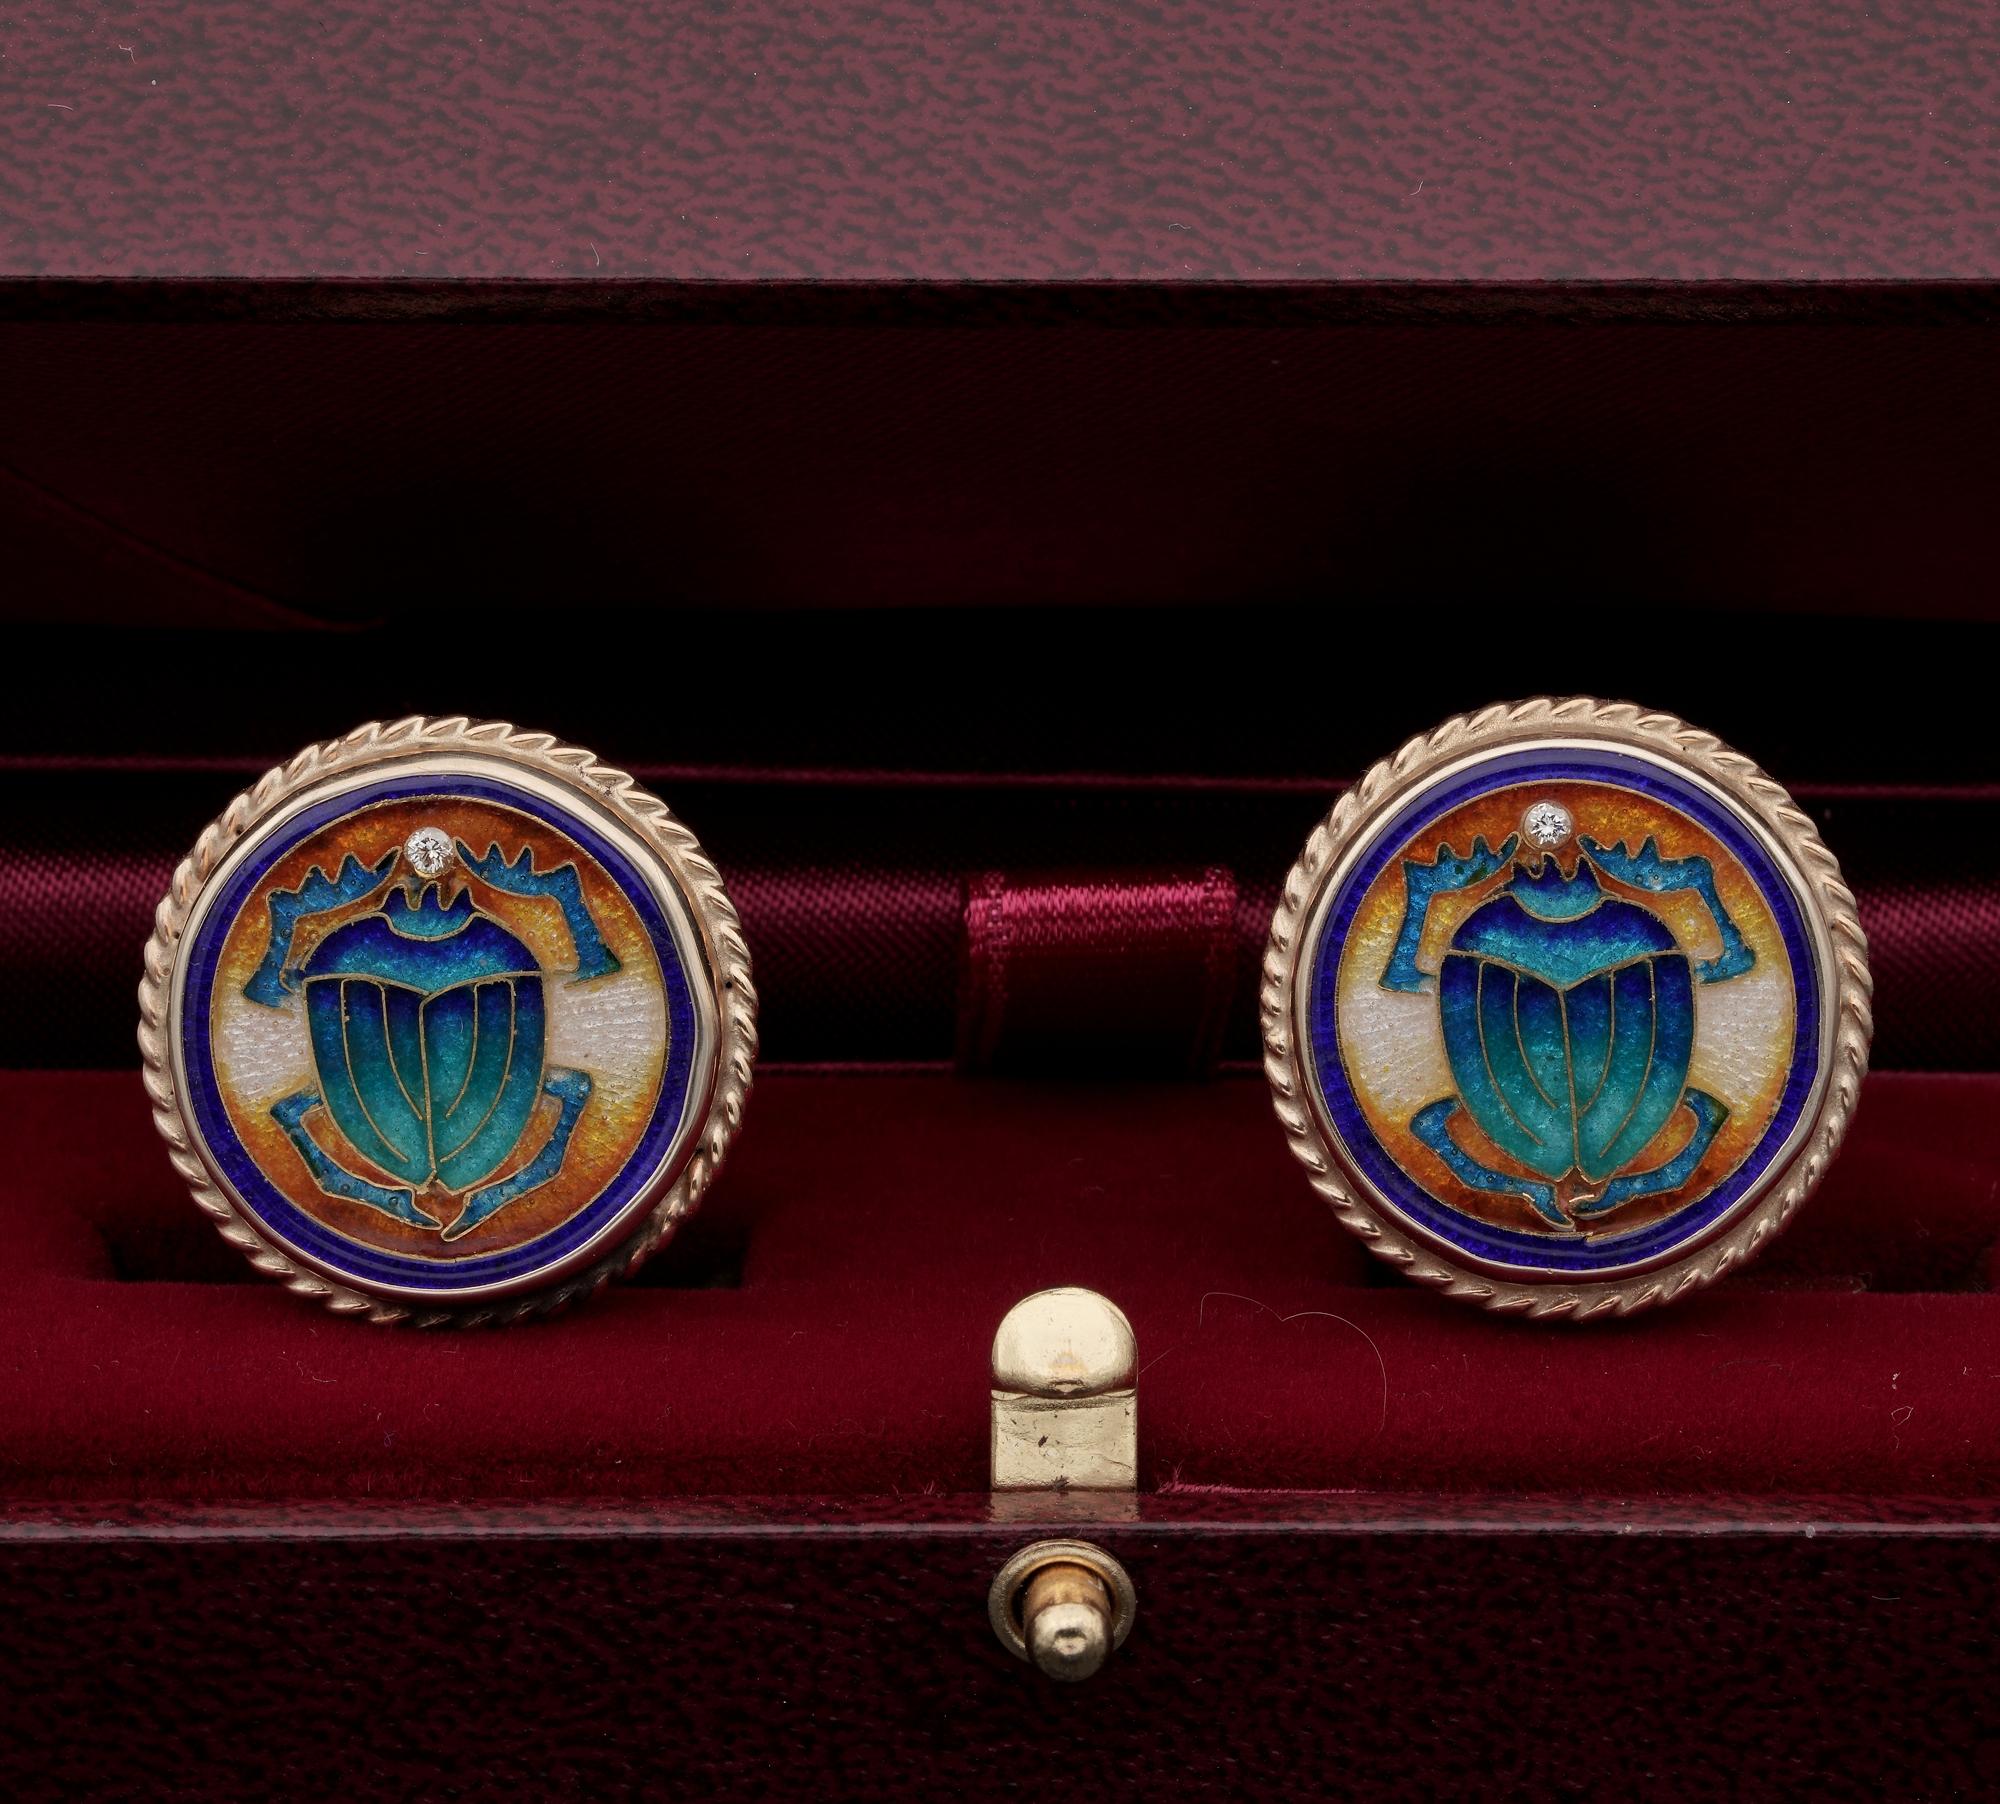 Scarabs as amulet have been used to symbolise wealth, used as currency, fashion accessory since the Egyptians
These superbly enamelled large cufflinks are 1940 ca
Skilfully hand crafted by past goldsmith masters, solid 14 Kt gold for the large